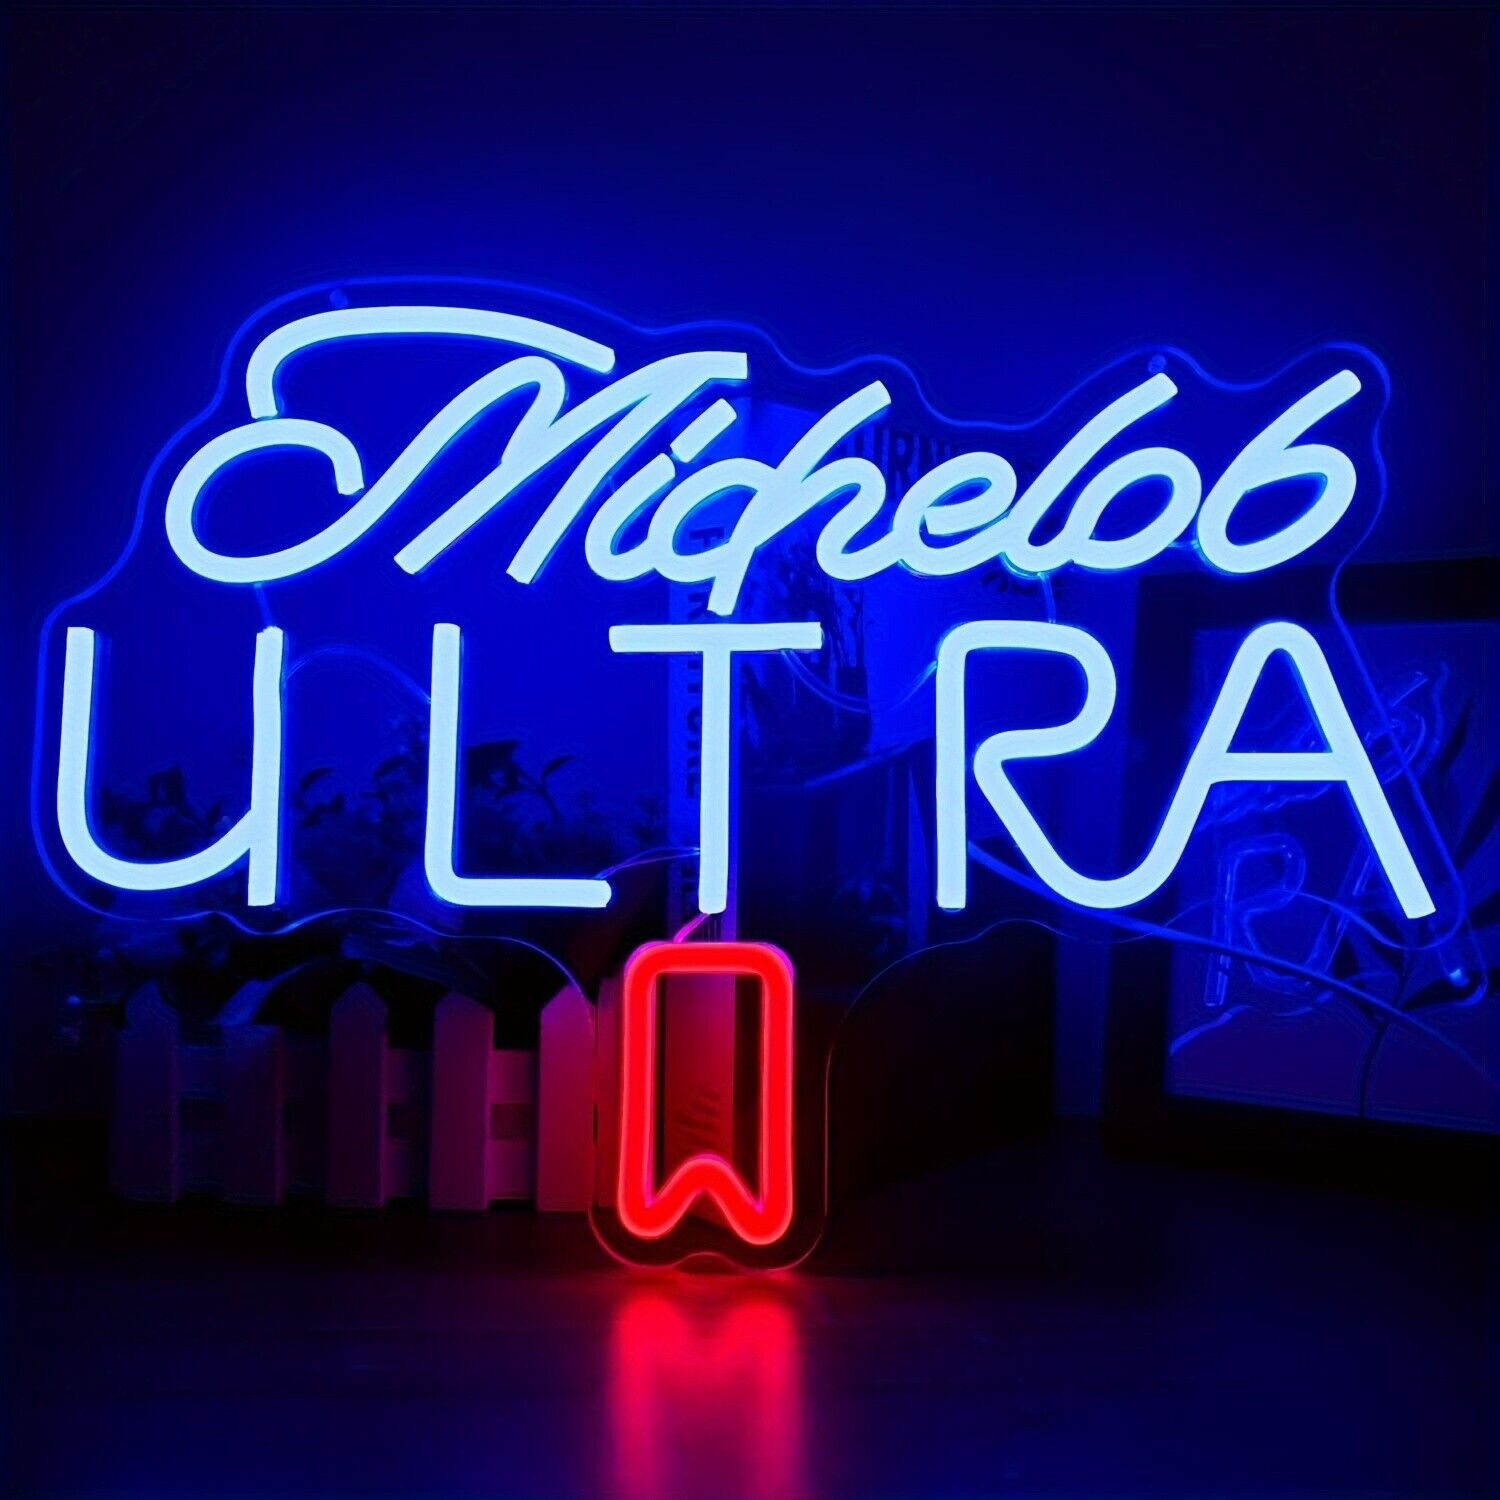 Uponray Beer Neon Signs Bar Led Sign, Geeinar Michelob Neon Sign for Wall Decor